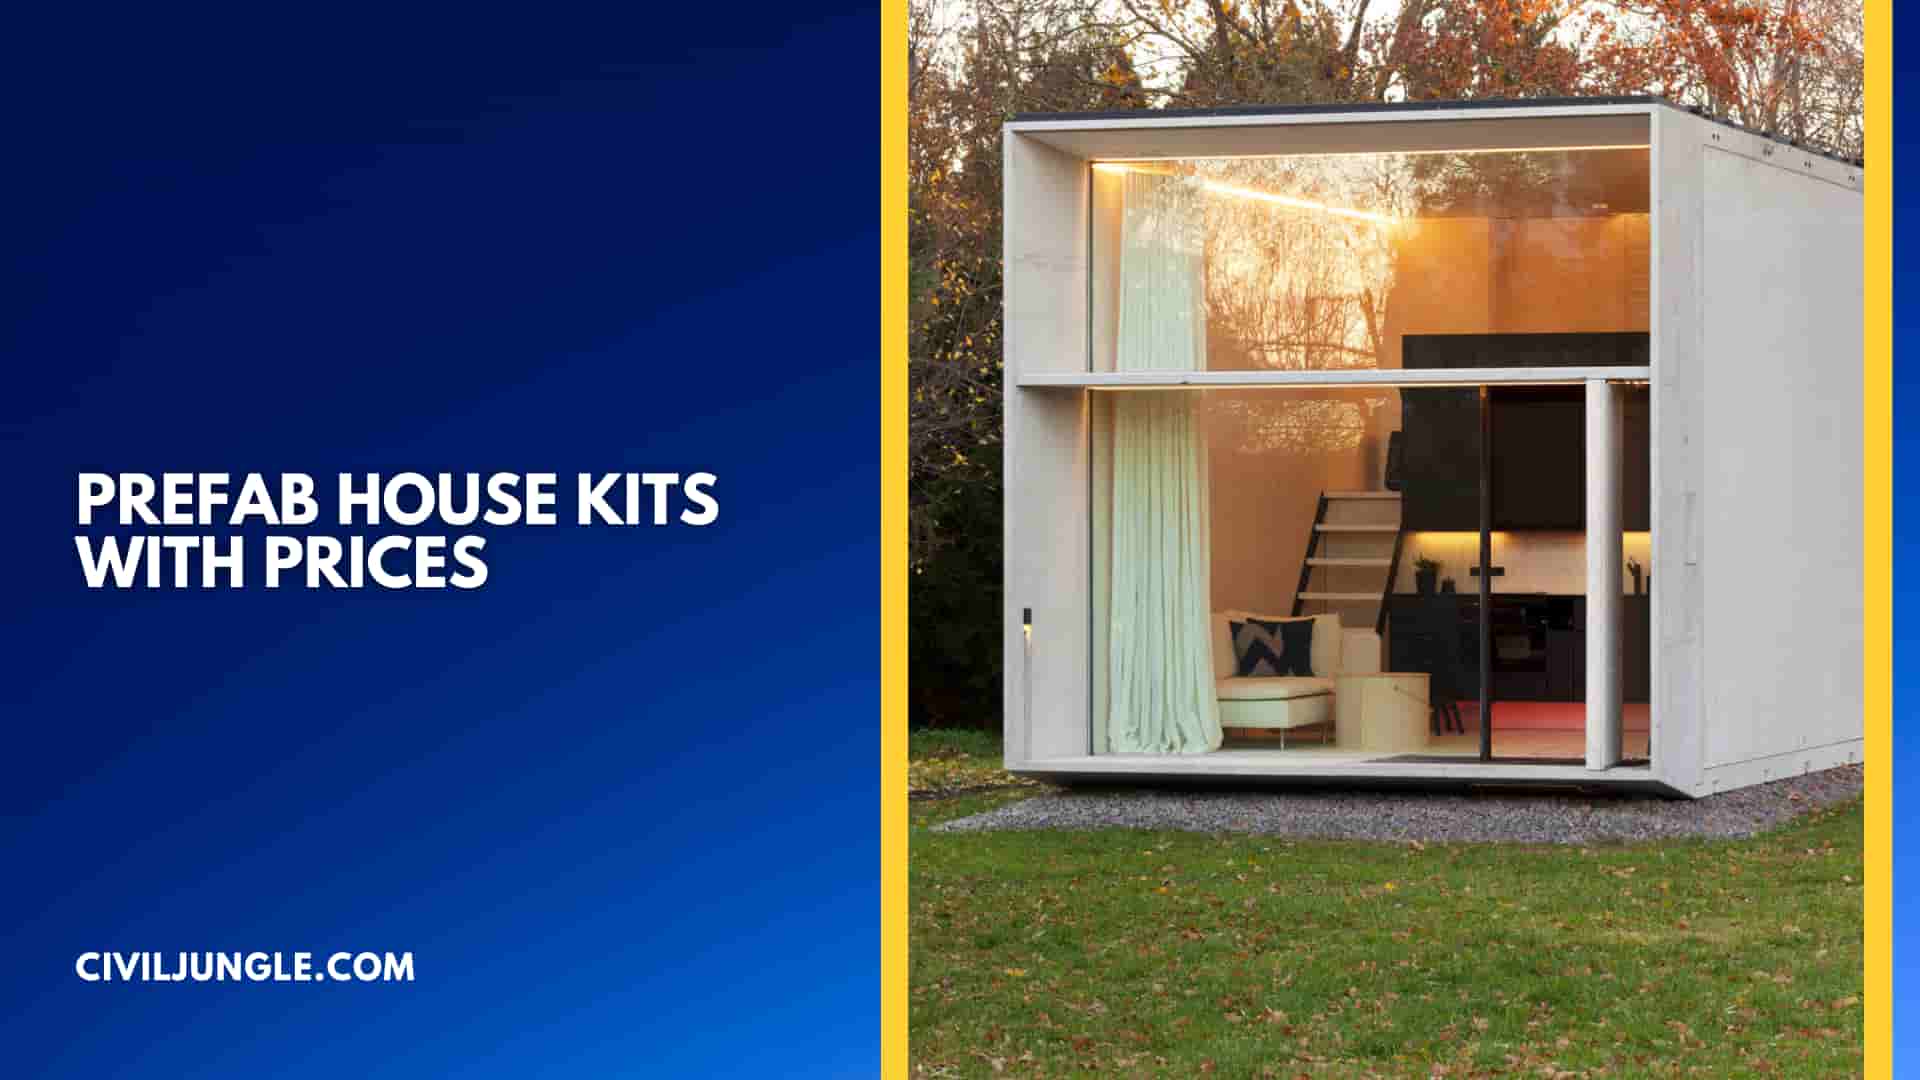 Prefab House Kits with Prices